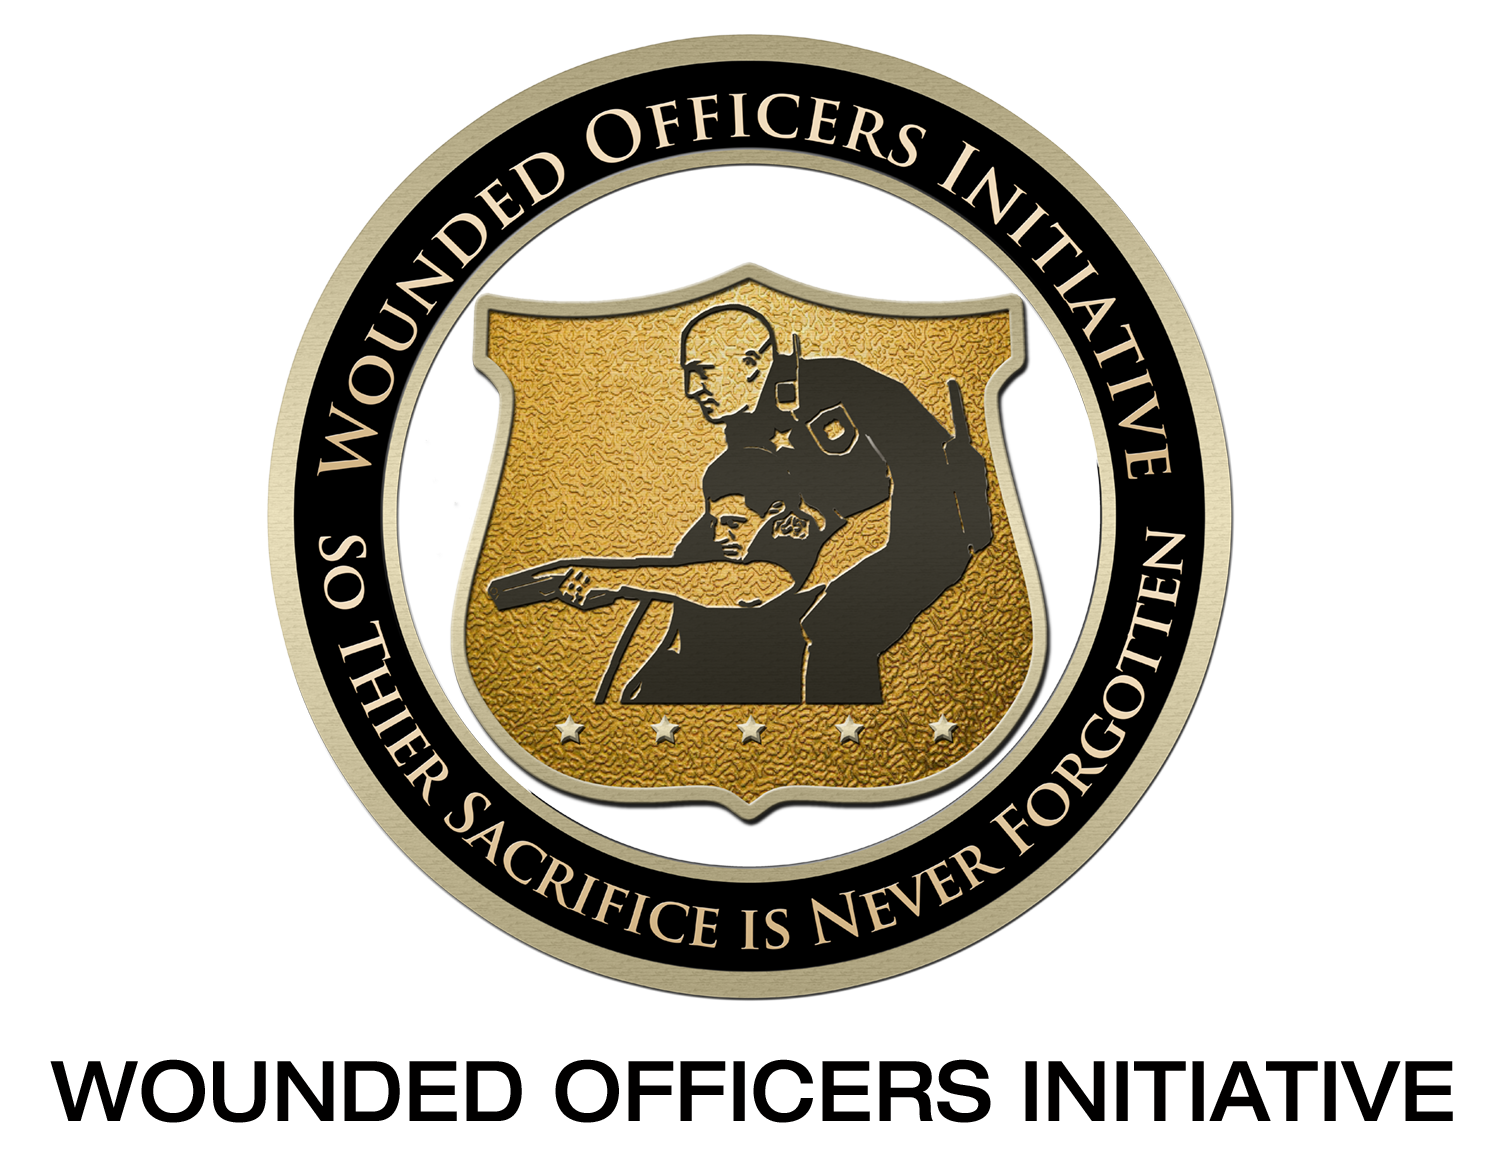 Wounded Officers Initiative